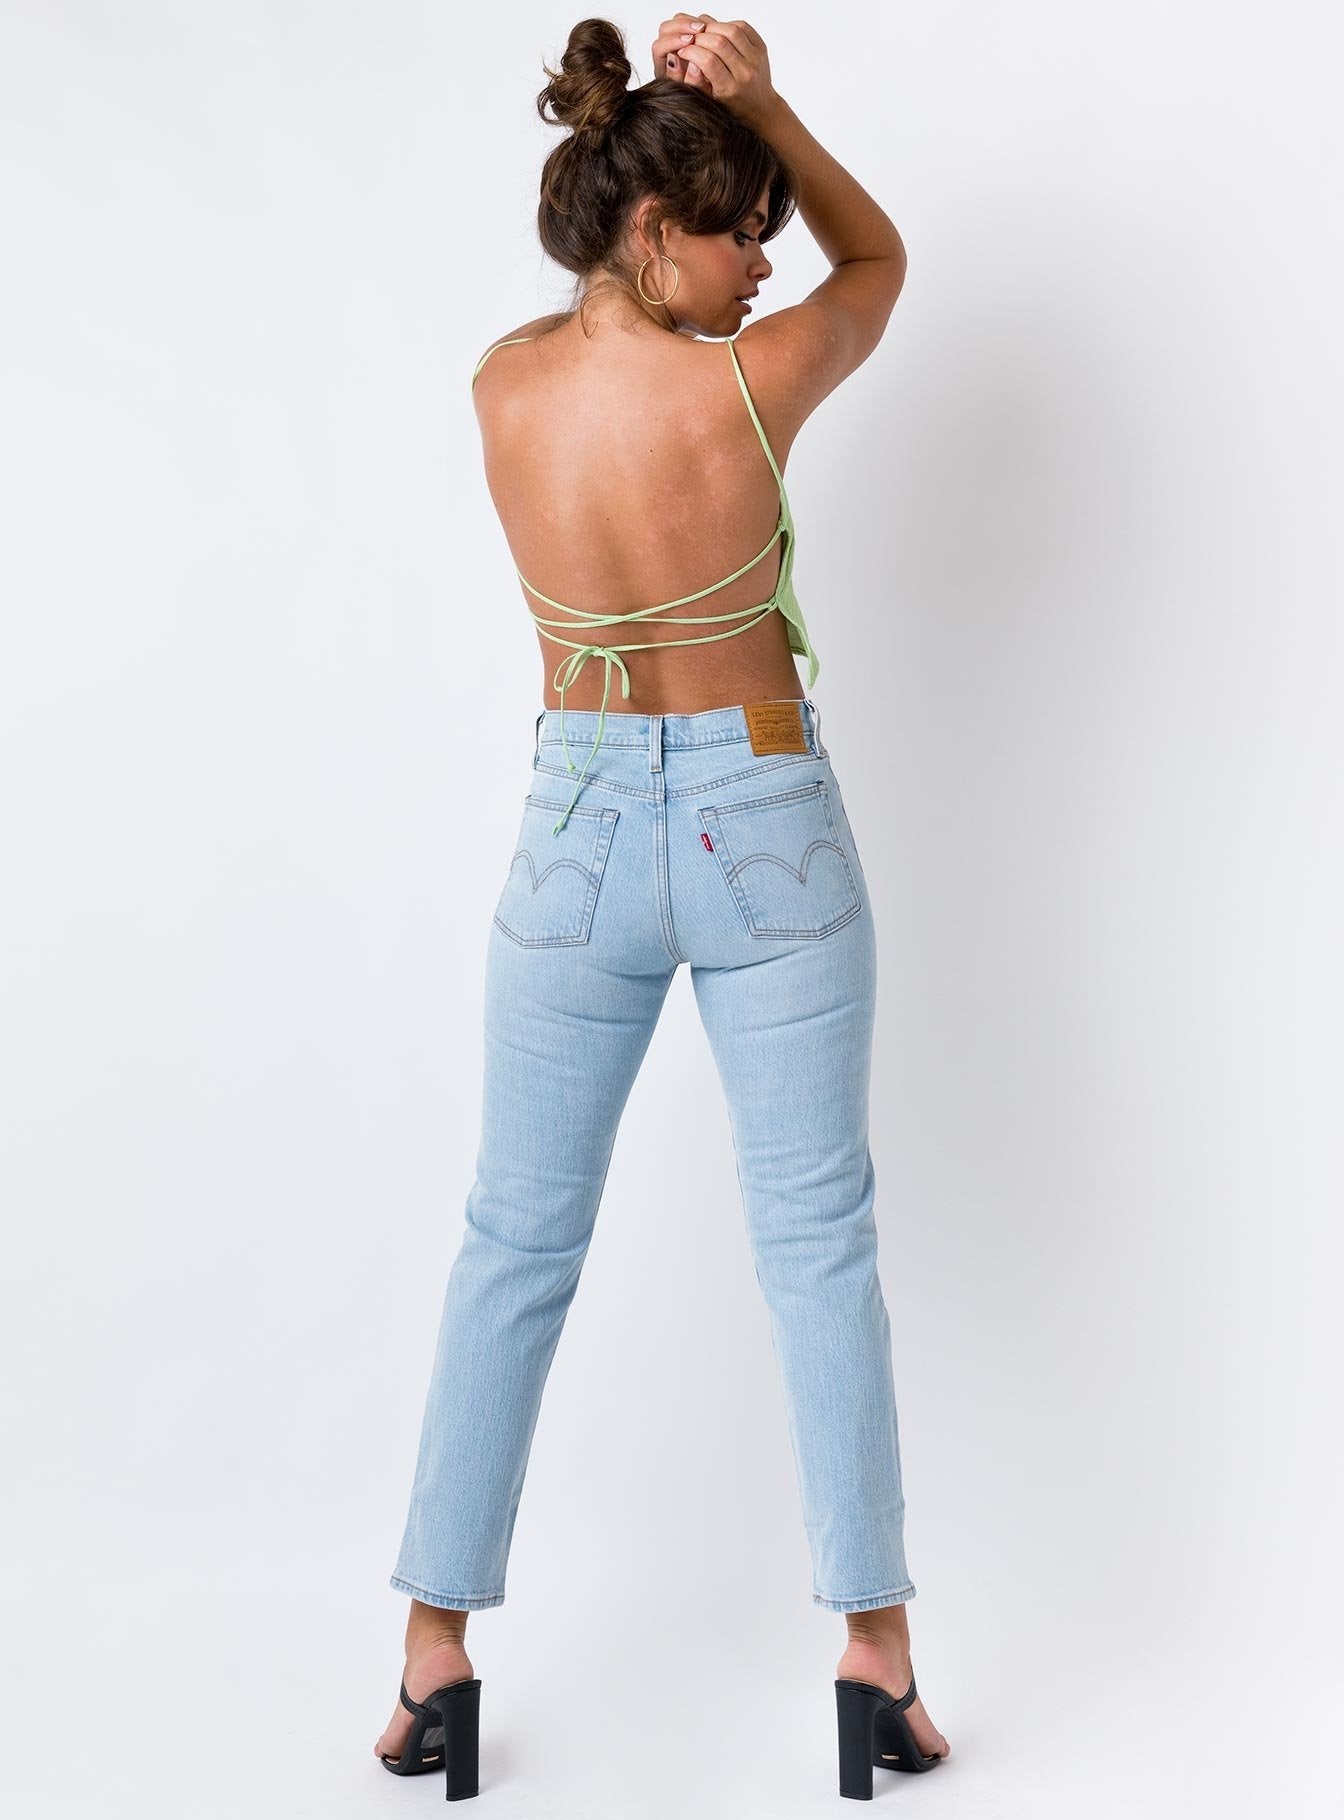 dibs wedgie straight jeans Cheaper 